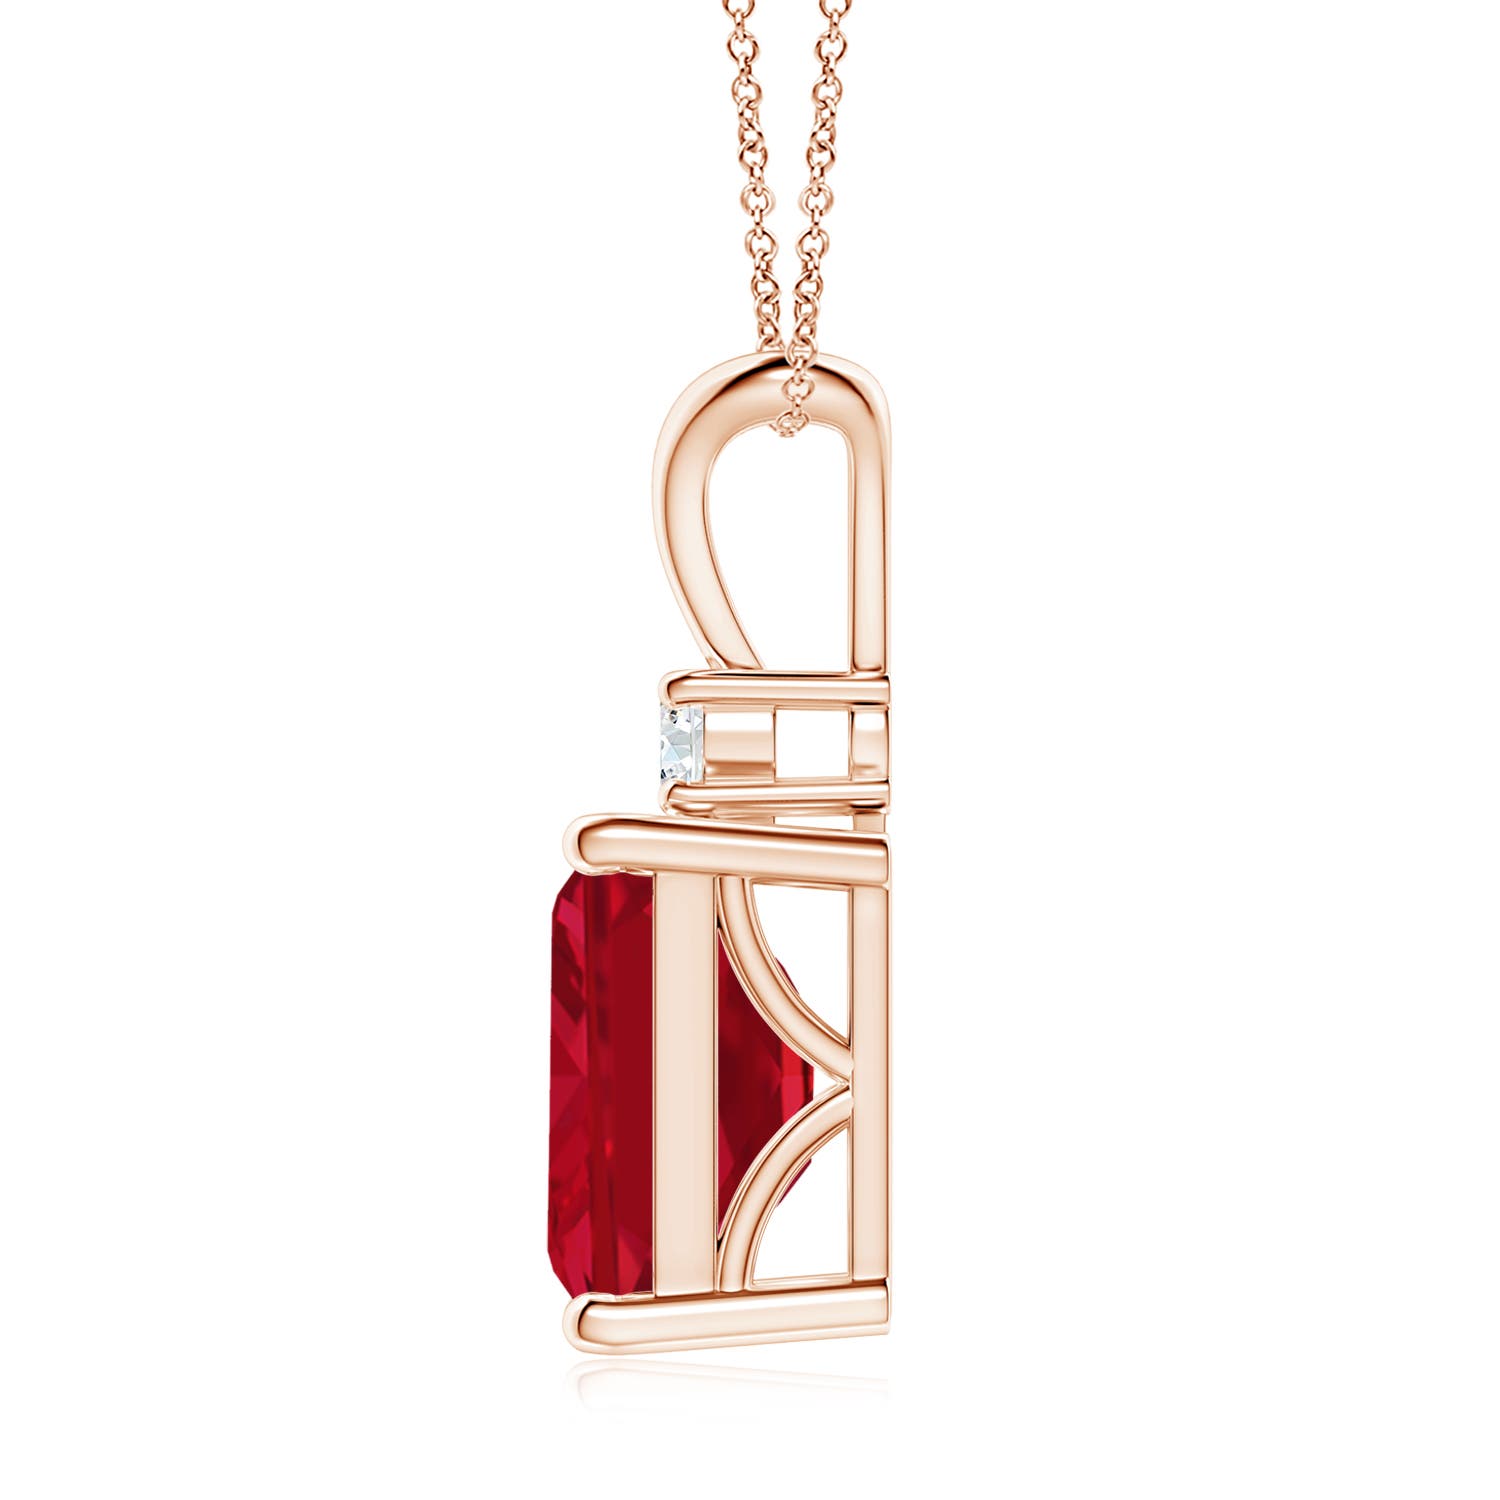 AAA - Ruby / 4.11 CT / 14 KT Rose Gold